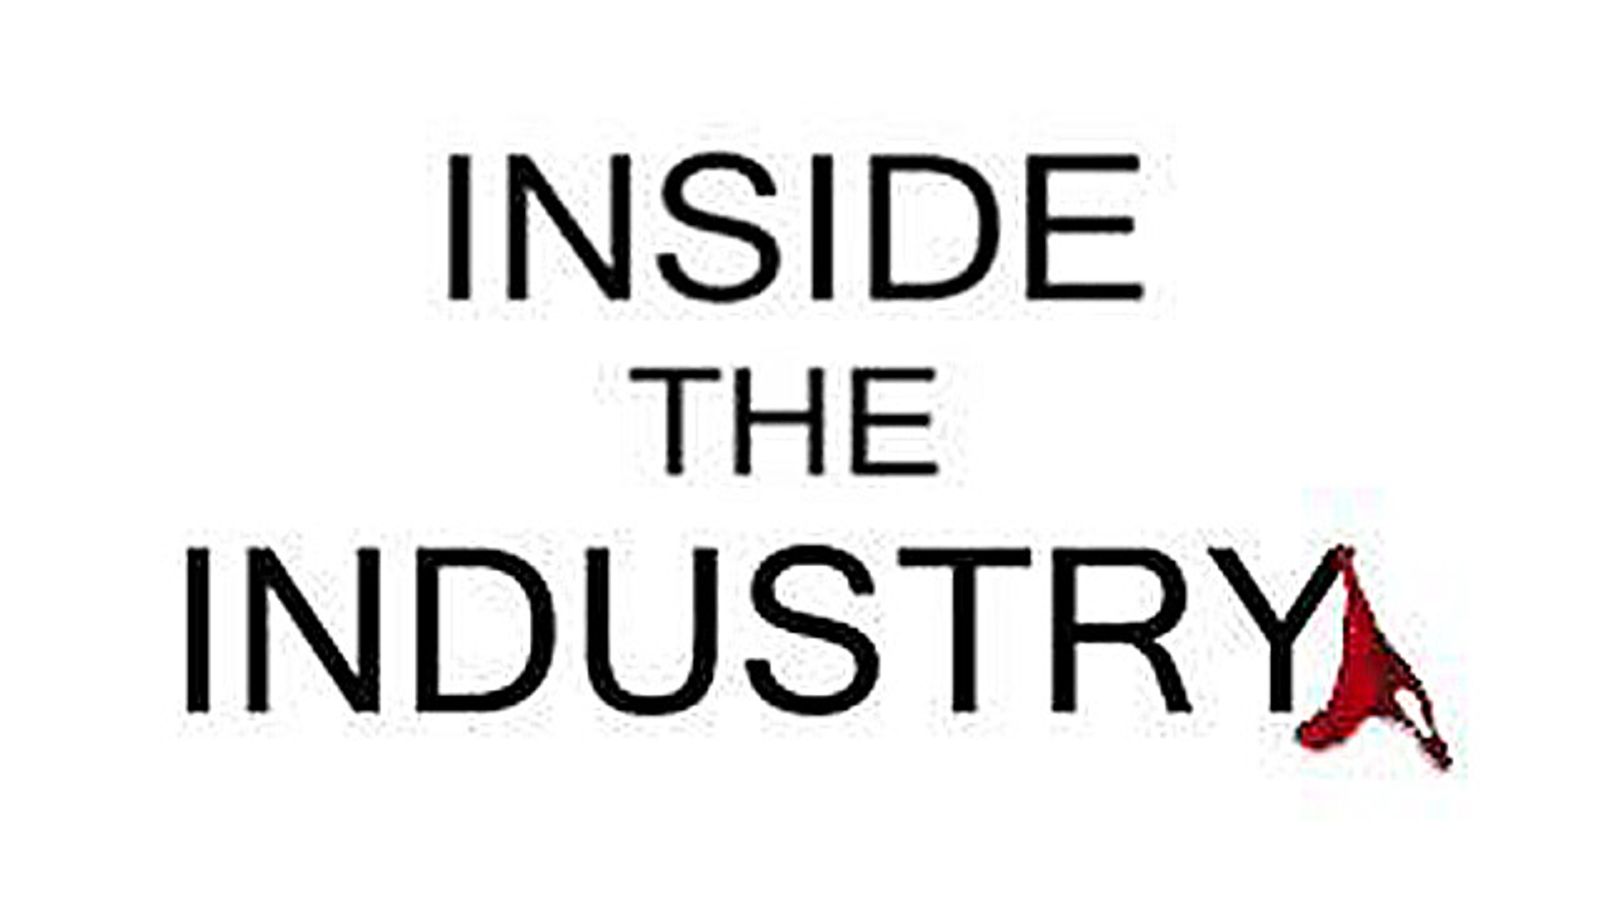 Stone, Moore, Holland And More on Inside The Industry Tonight